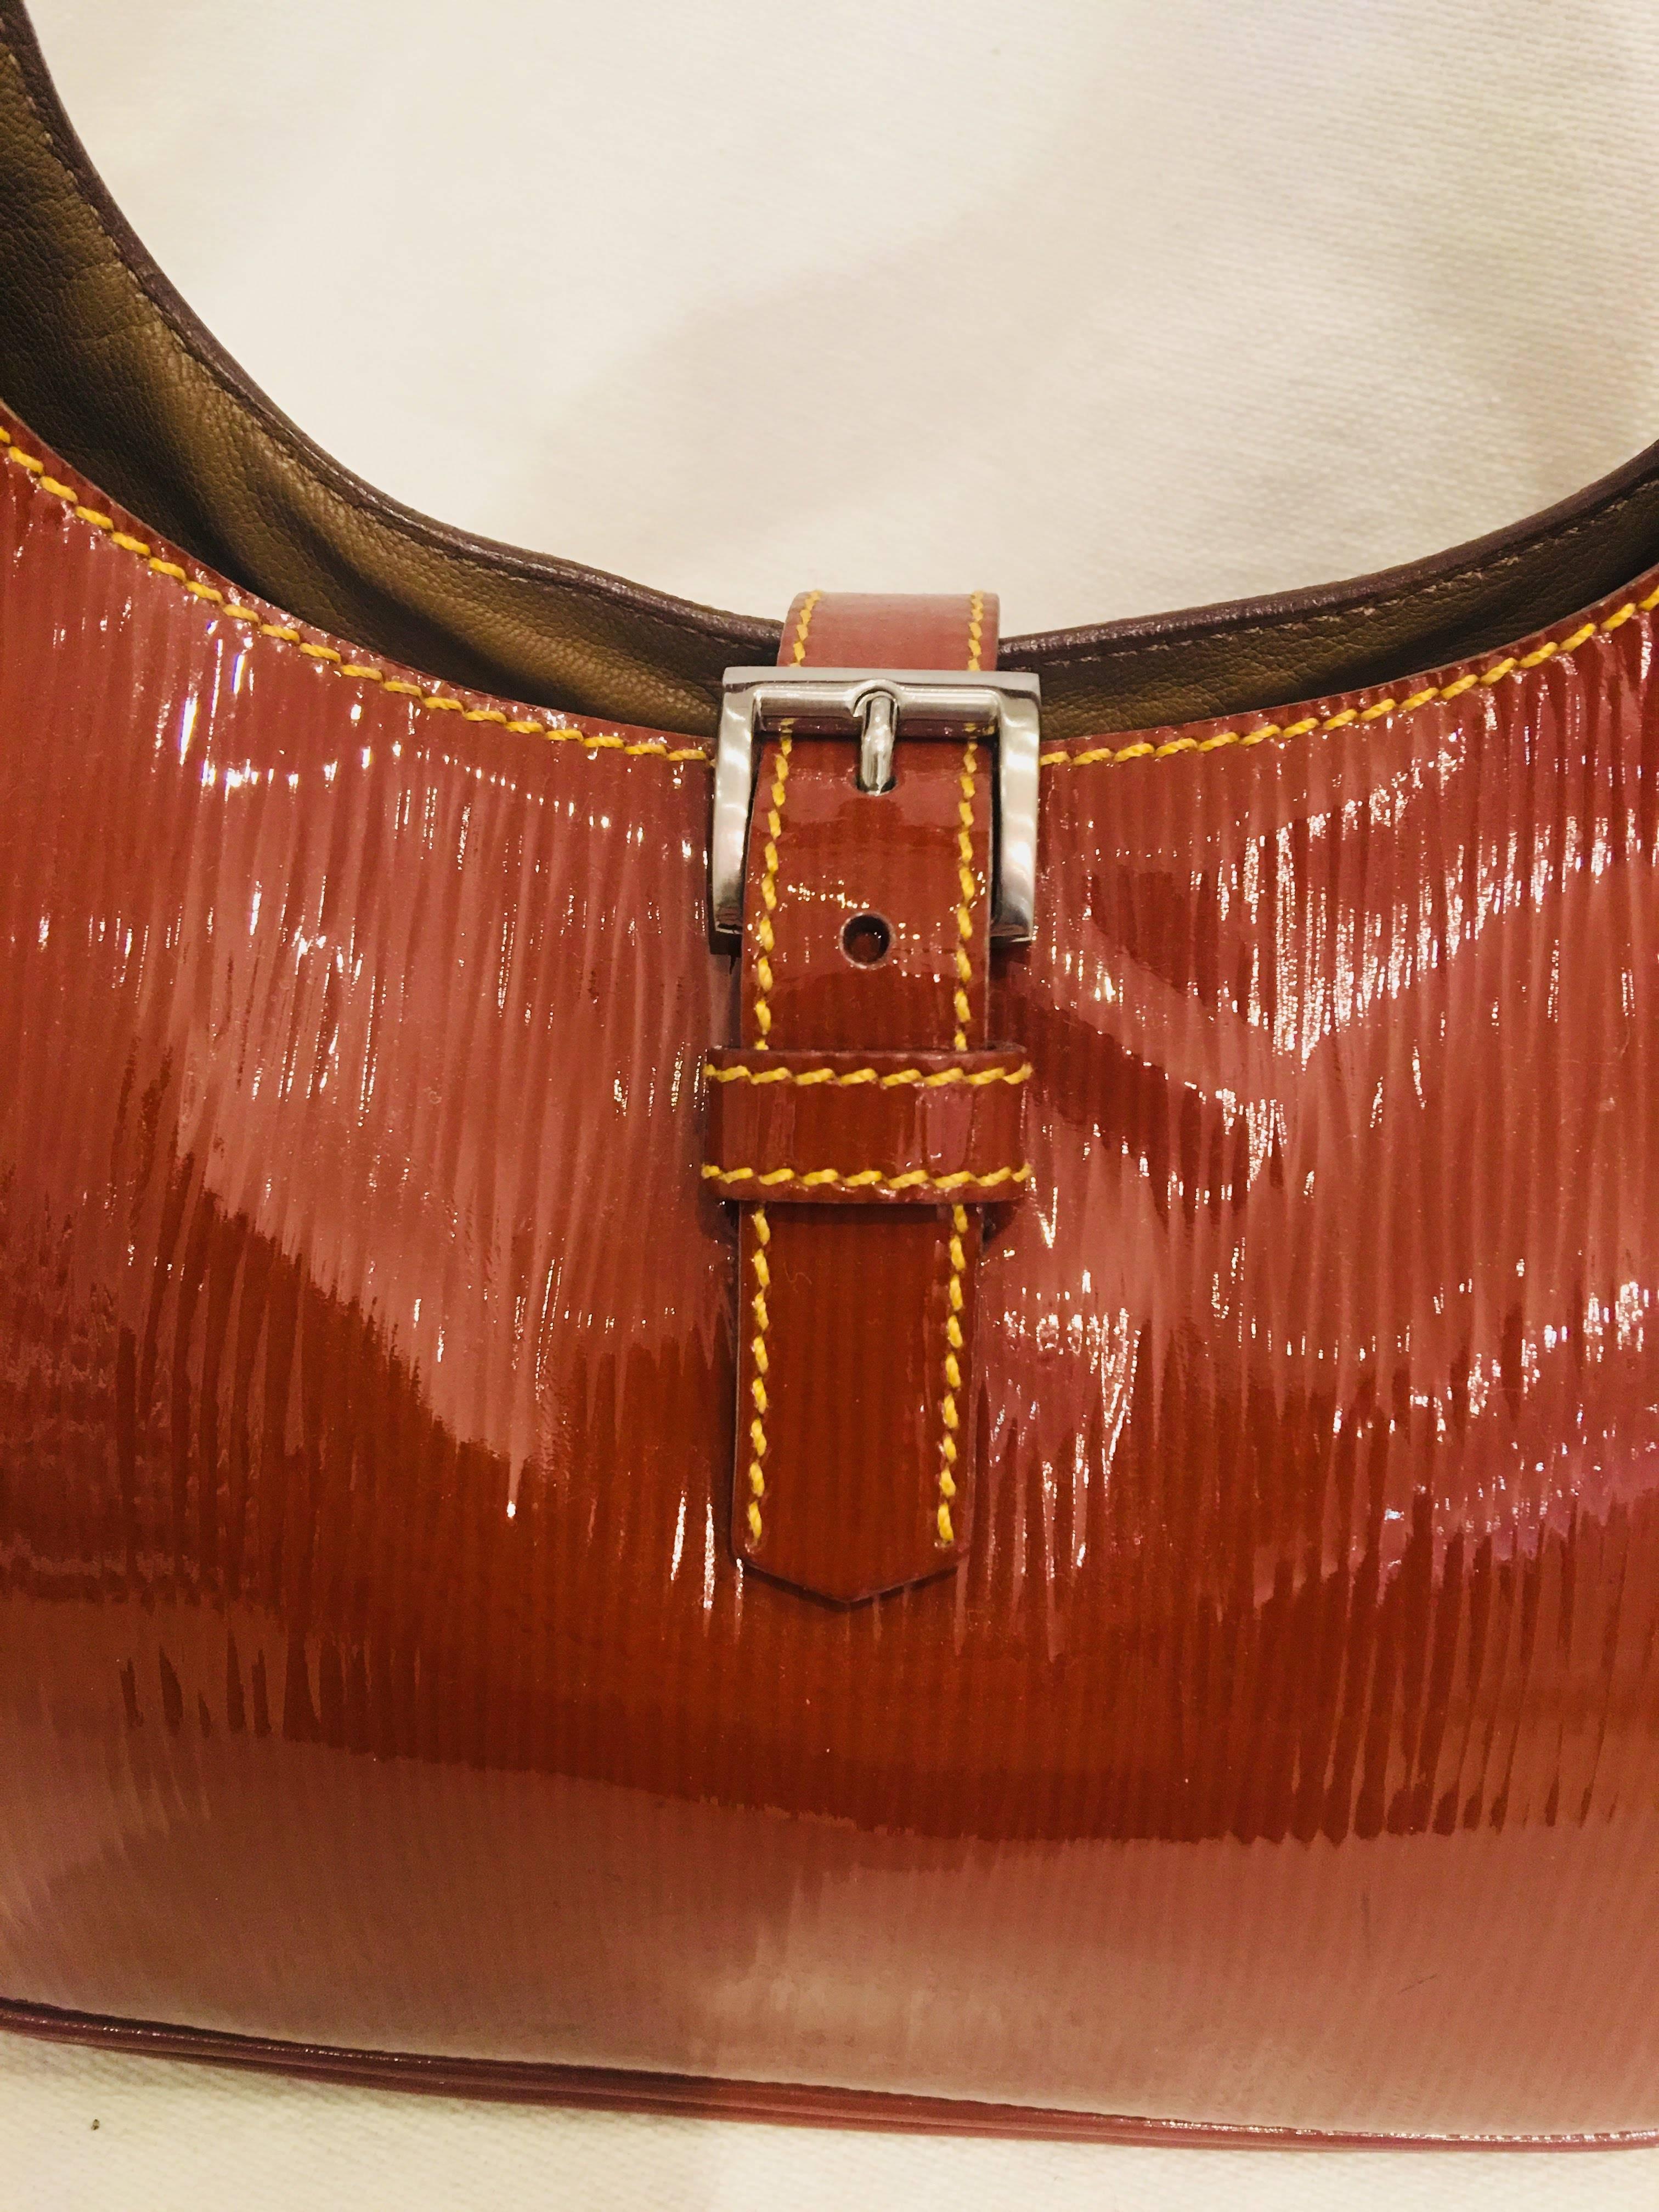 Prada Kidney Bean Single Strap Brown Patent Leather Shoulder Bag with Buckle Closure, Silver Hardware and Tan Stitching.